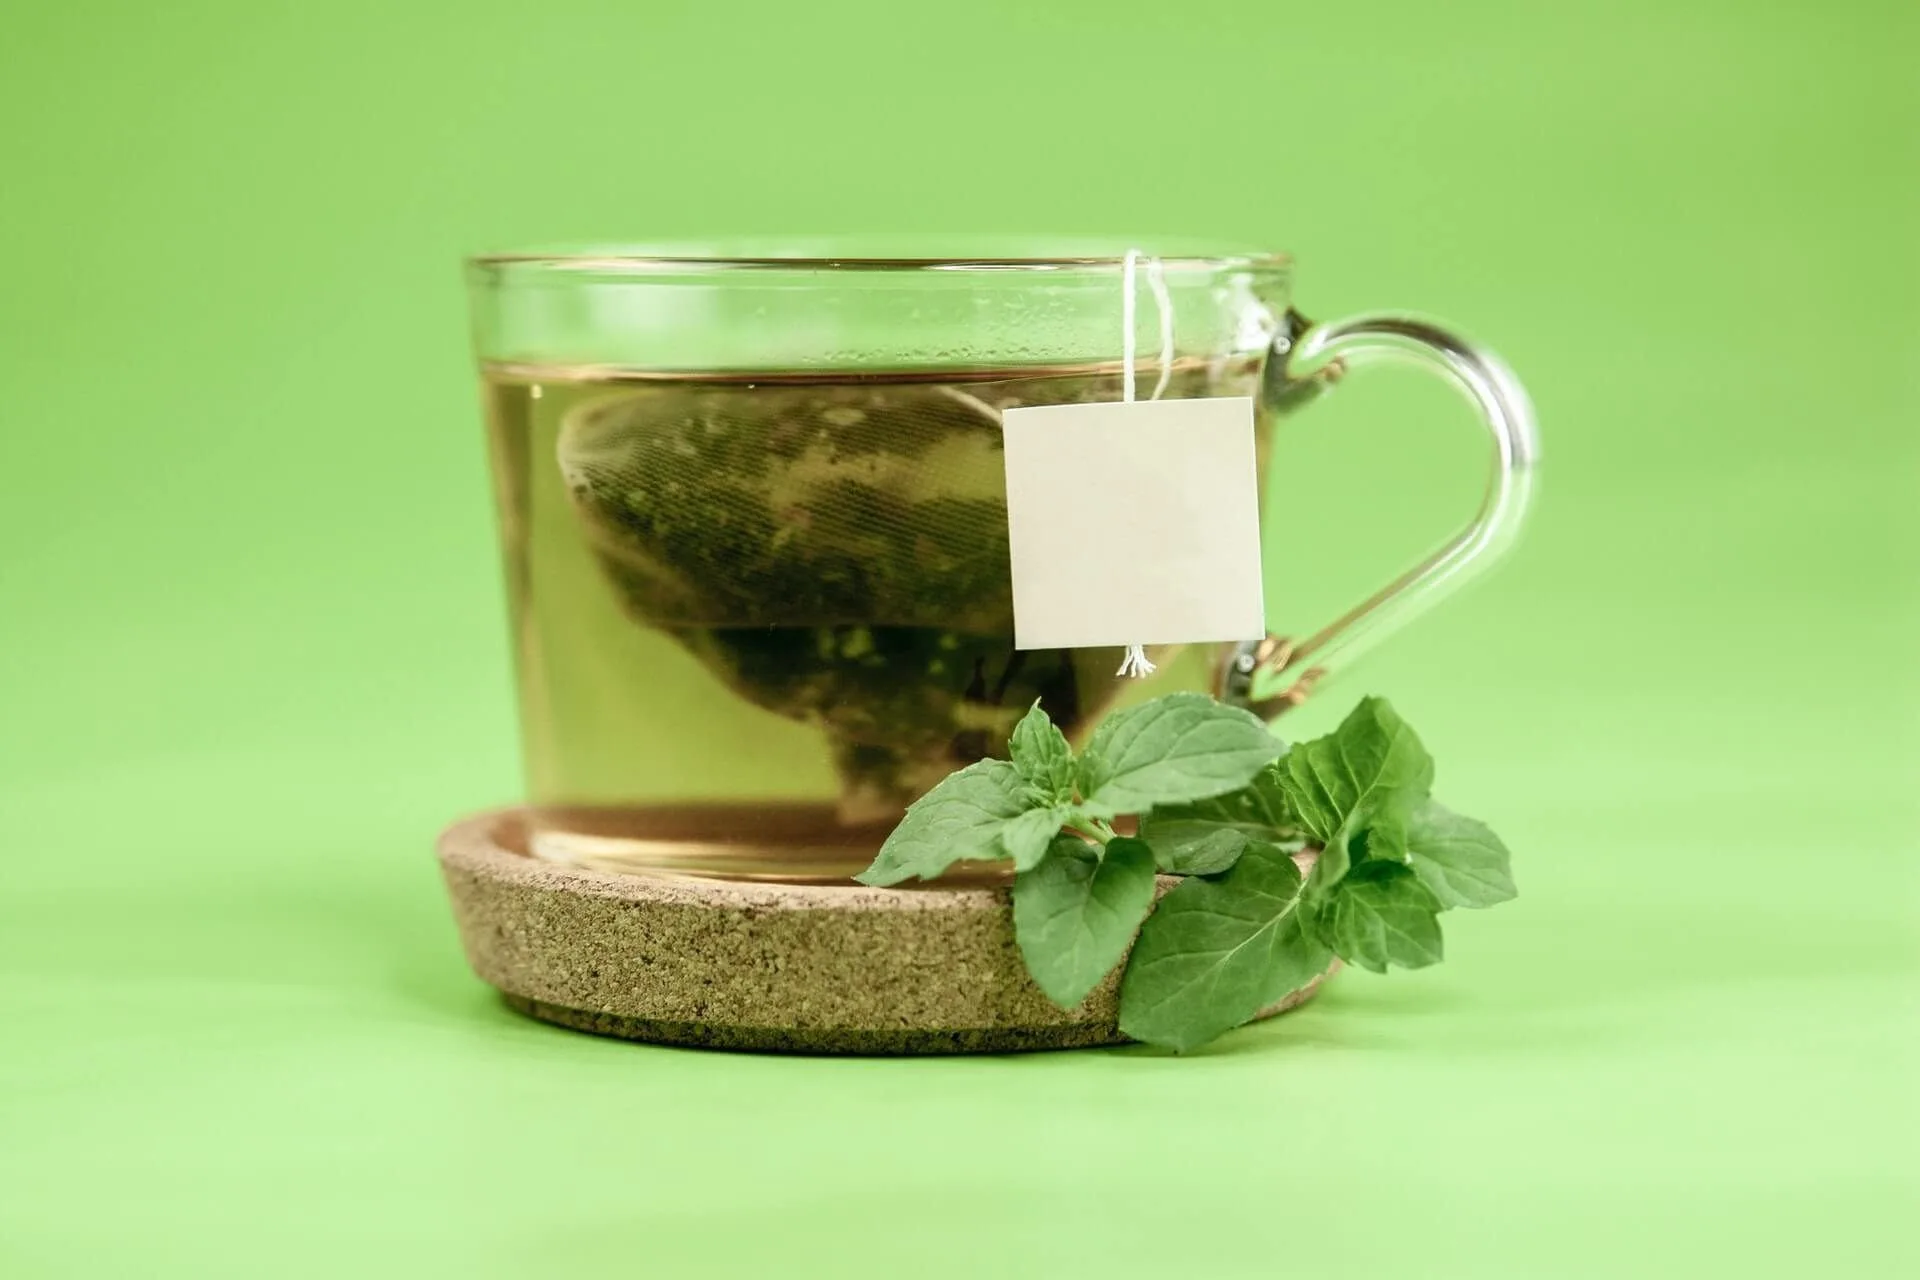 The Answers To All Your Questions On Green Tea and Why It’s So Healthy For You